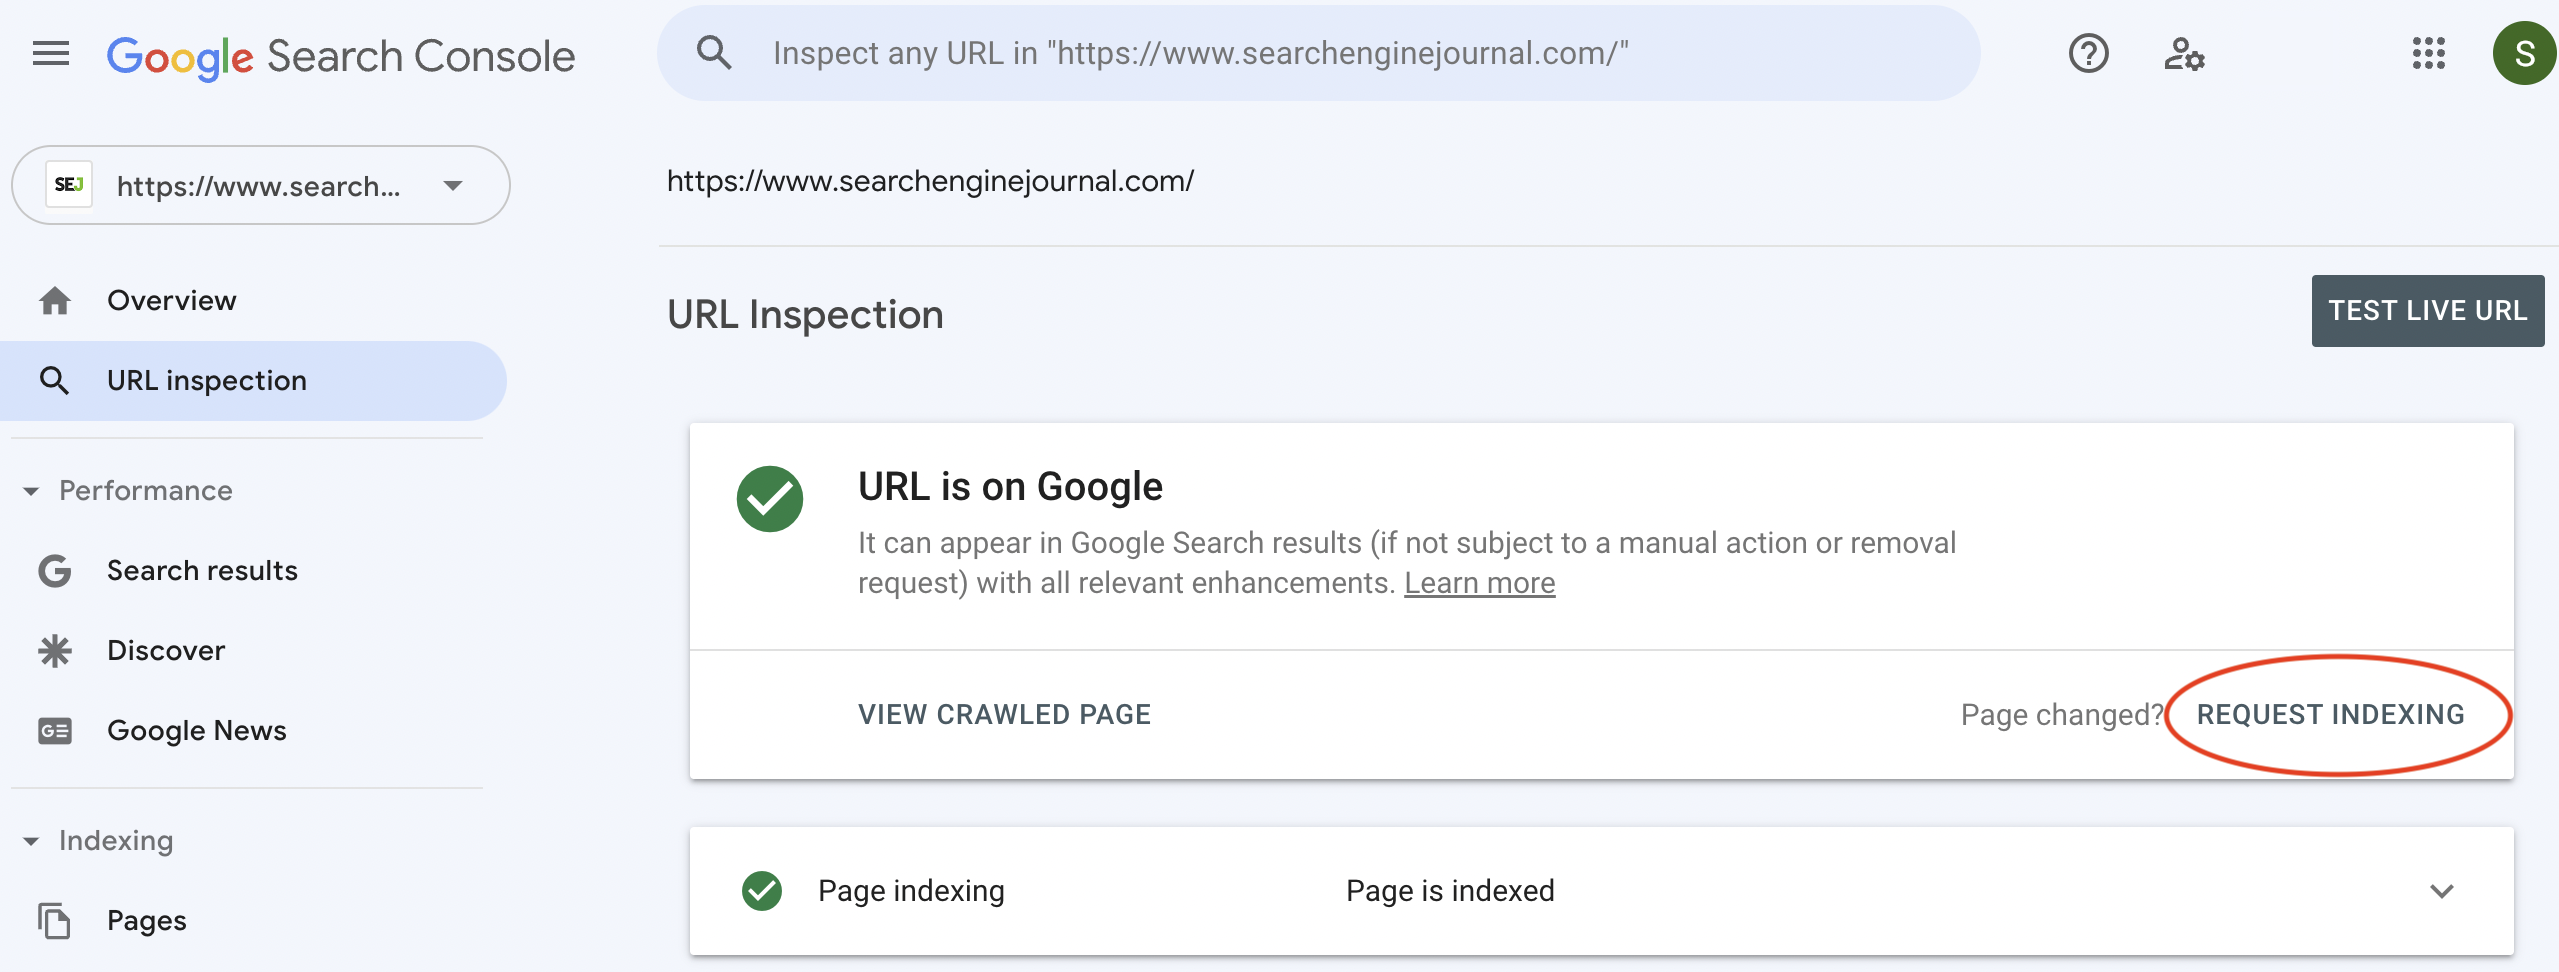 Request Indexing With Google Search Console